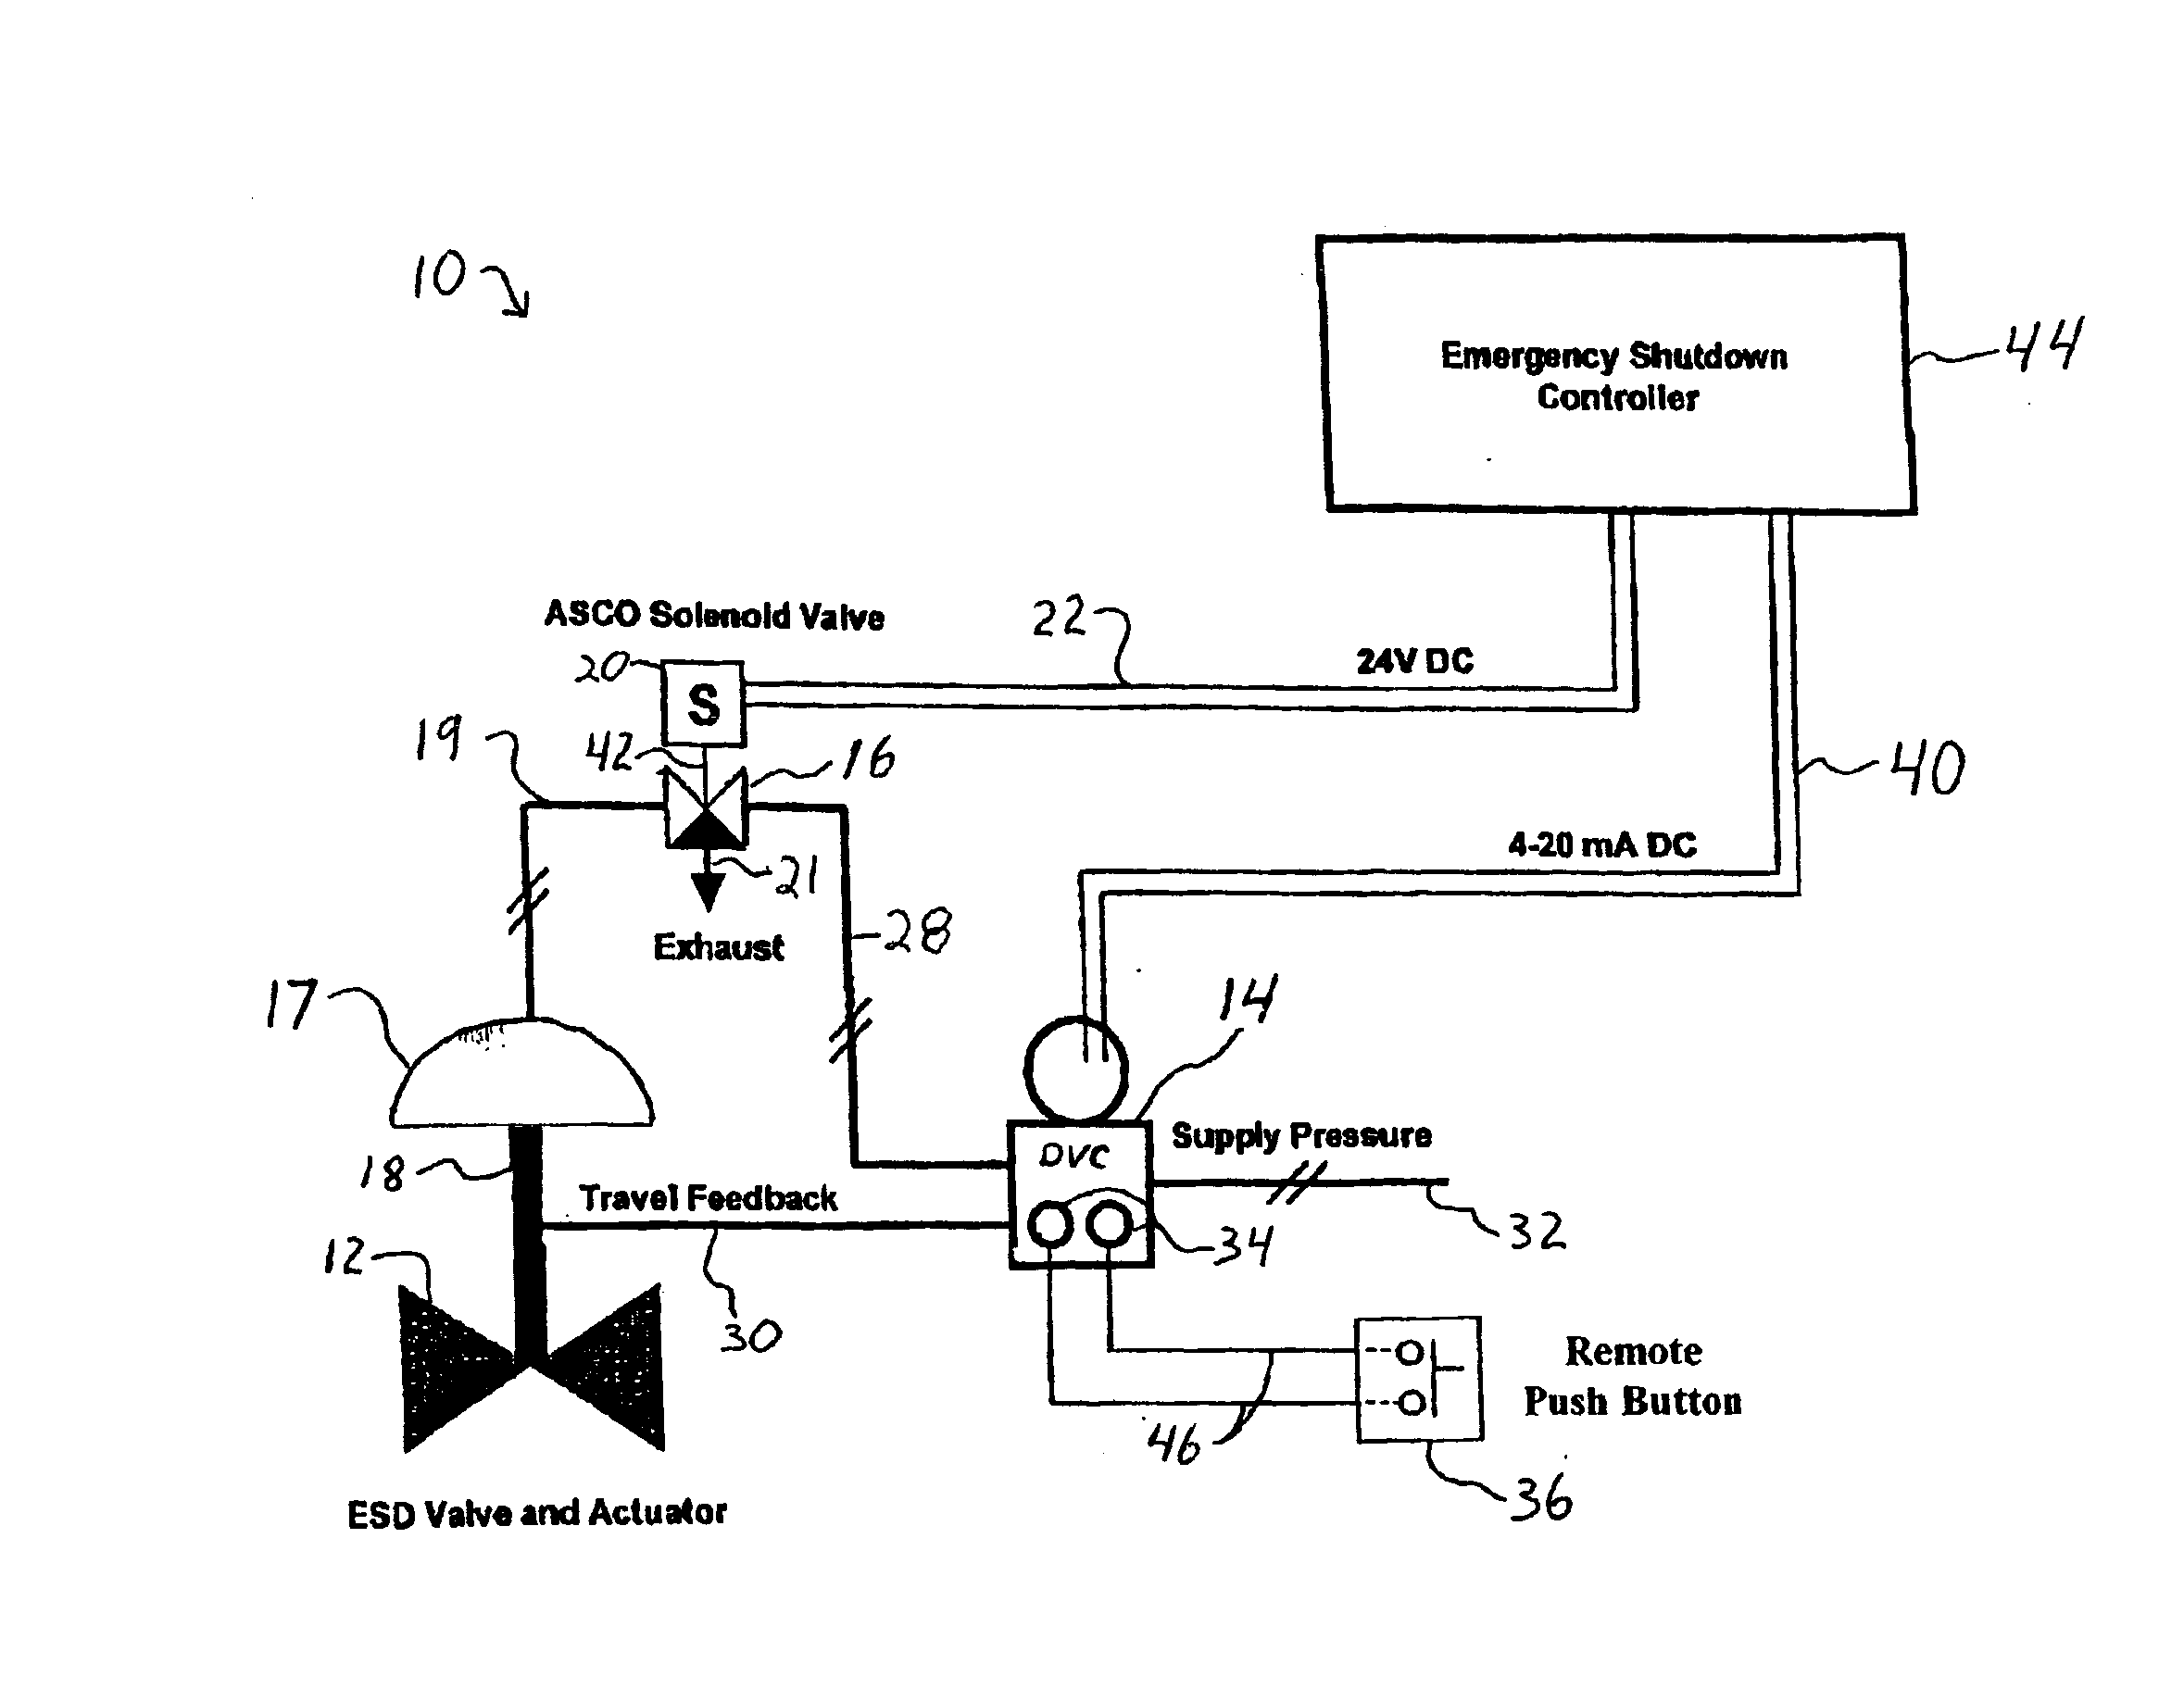 Control device test system with a remote switch activation